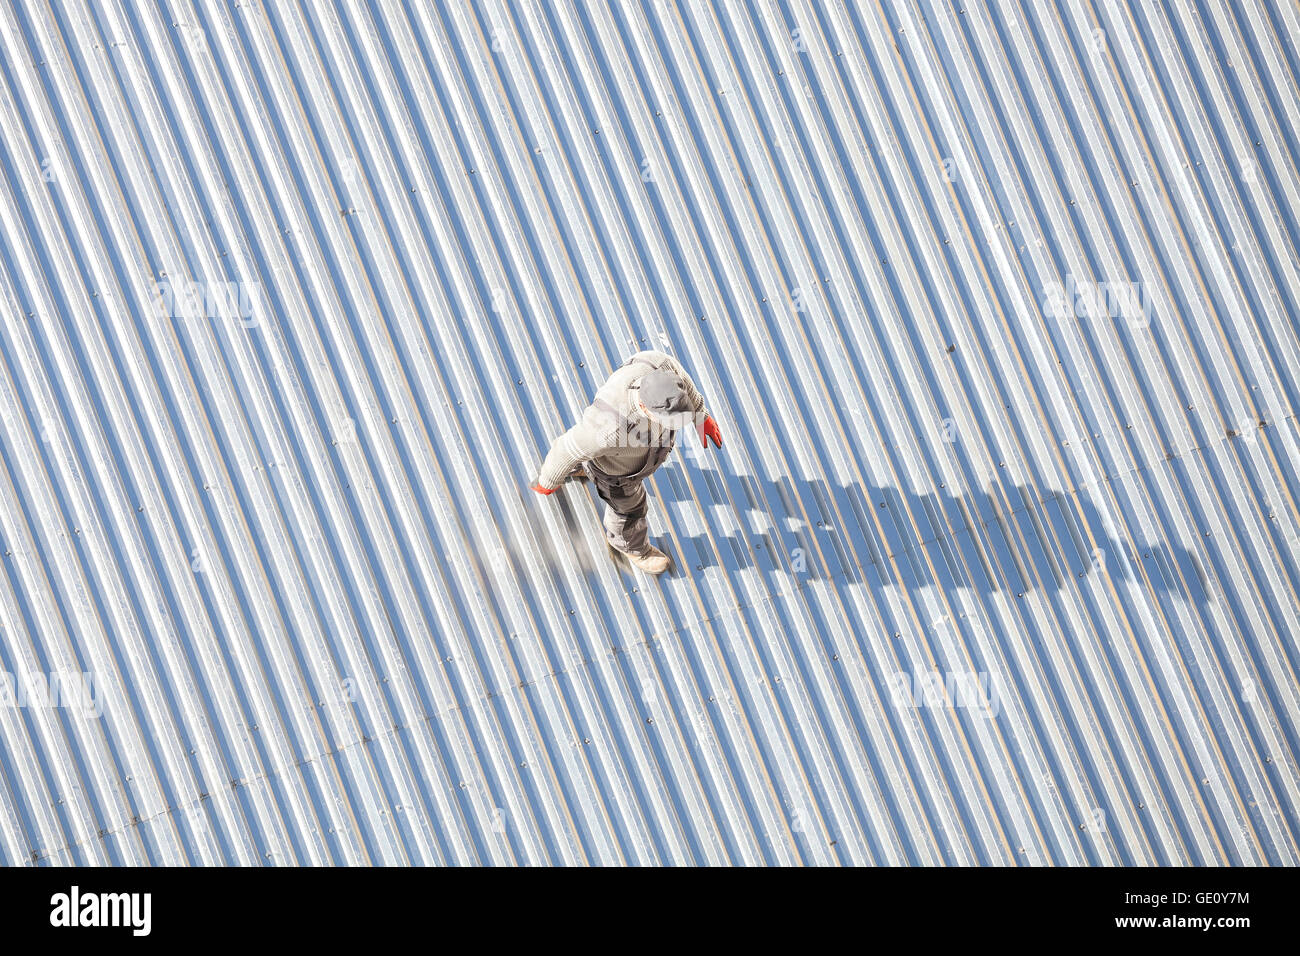 Man inspecting a store roof made of corrugated metal sheets after repair, picture taken from above. Stock Photo